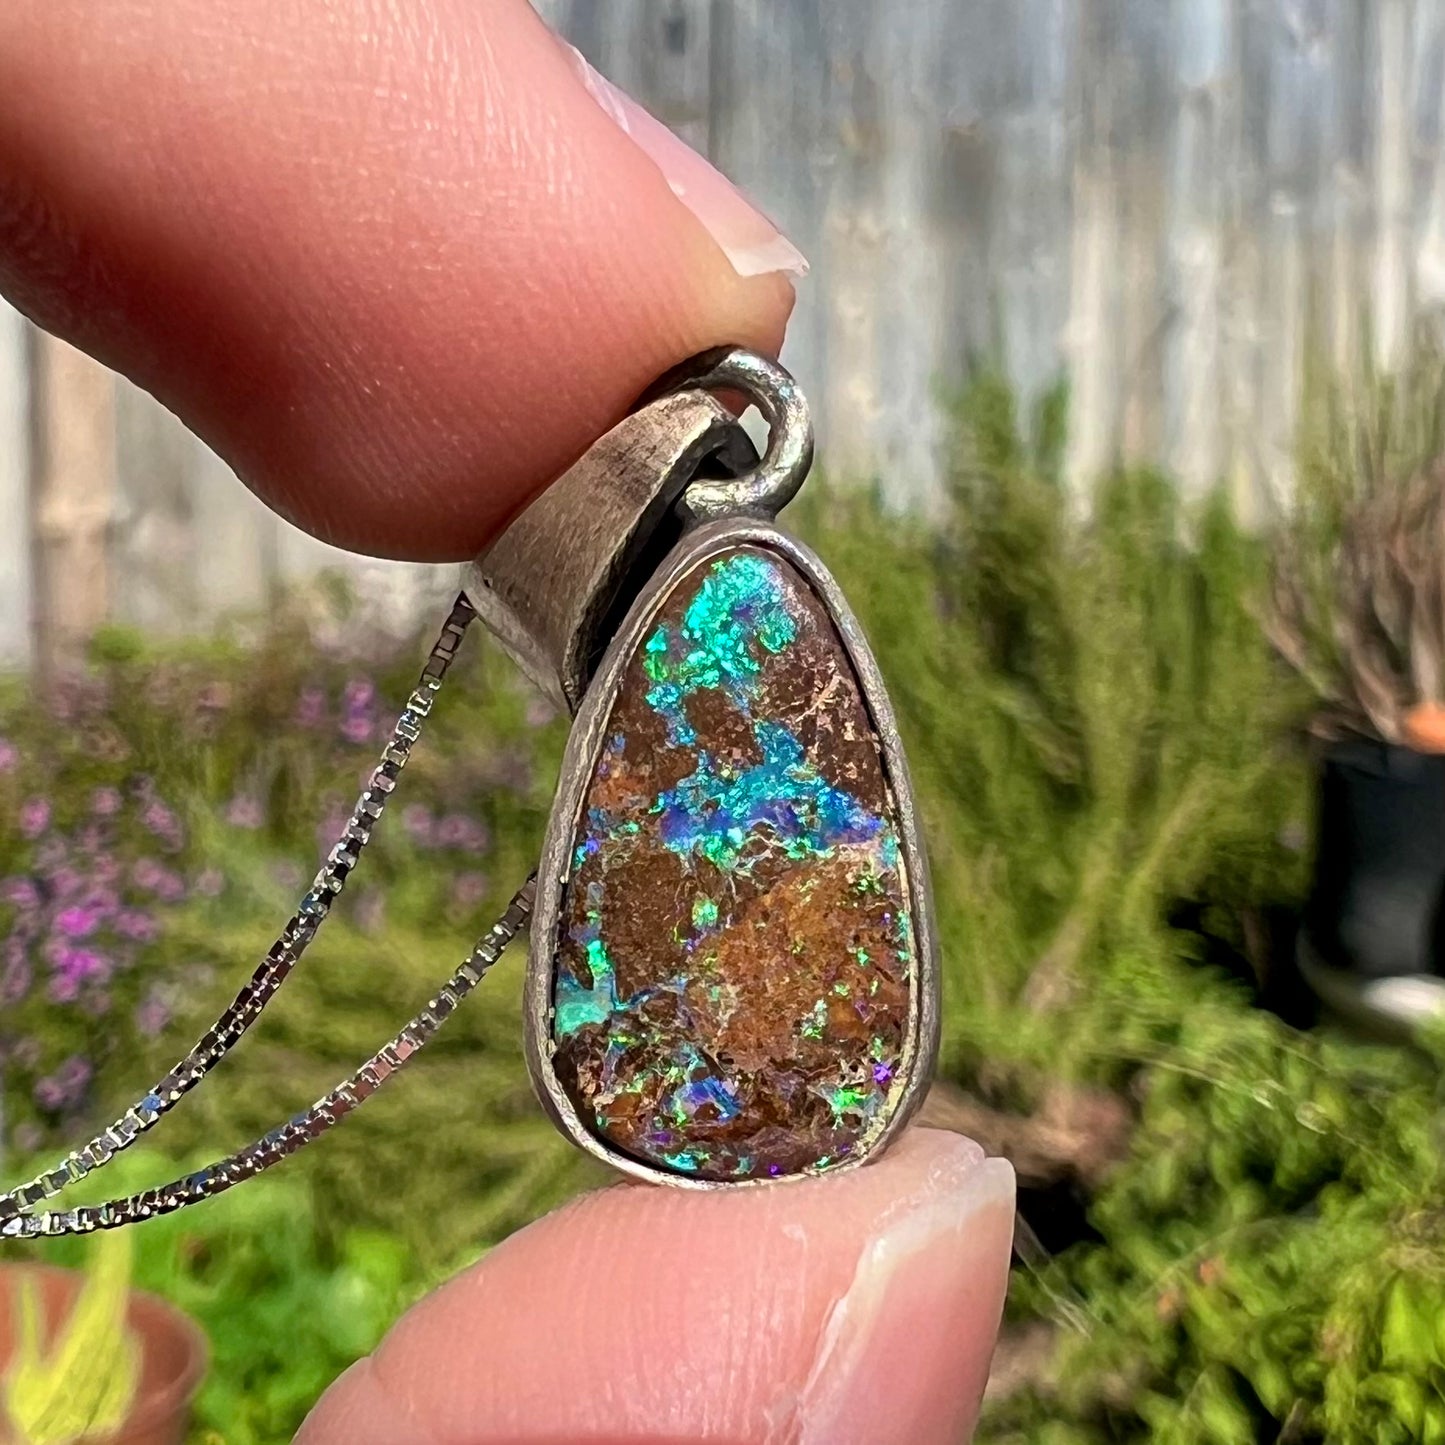 A handmade, satin finish sterling silver pendant set with a drop shaped boulder opal stone.